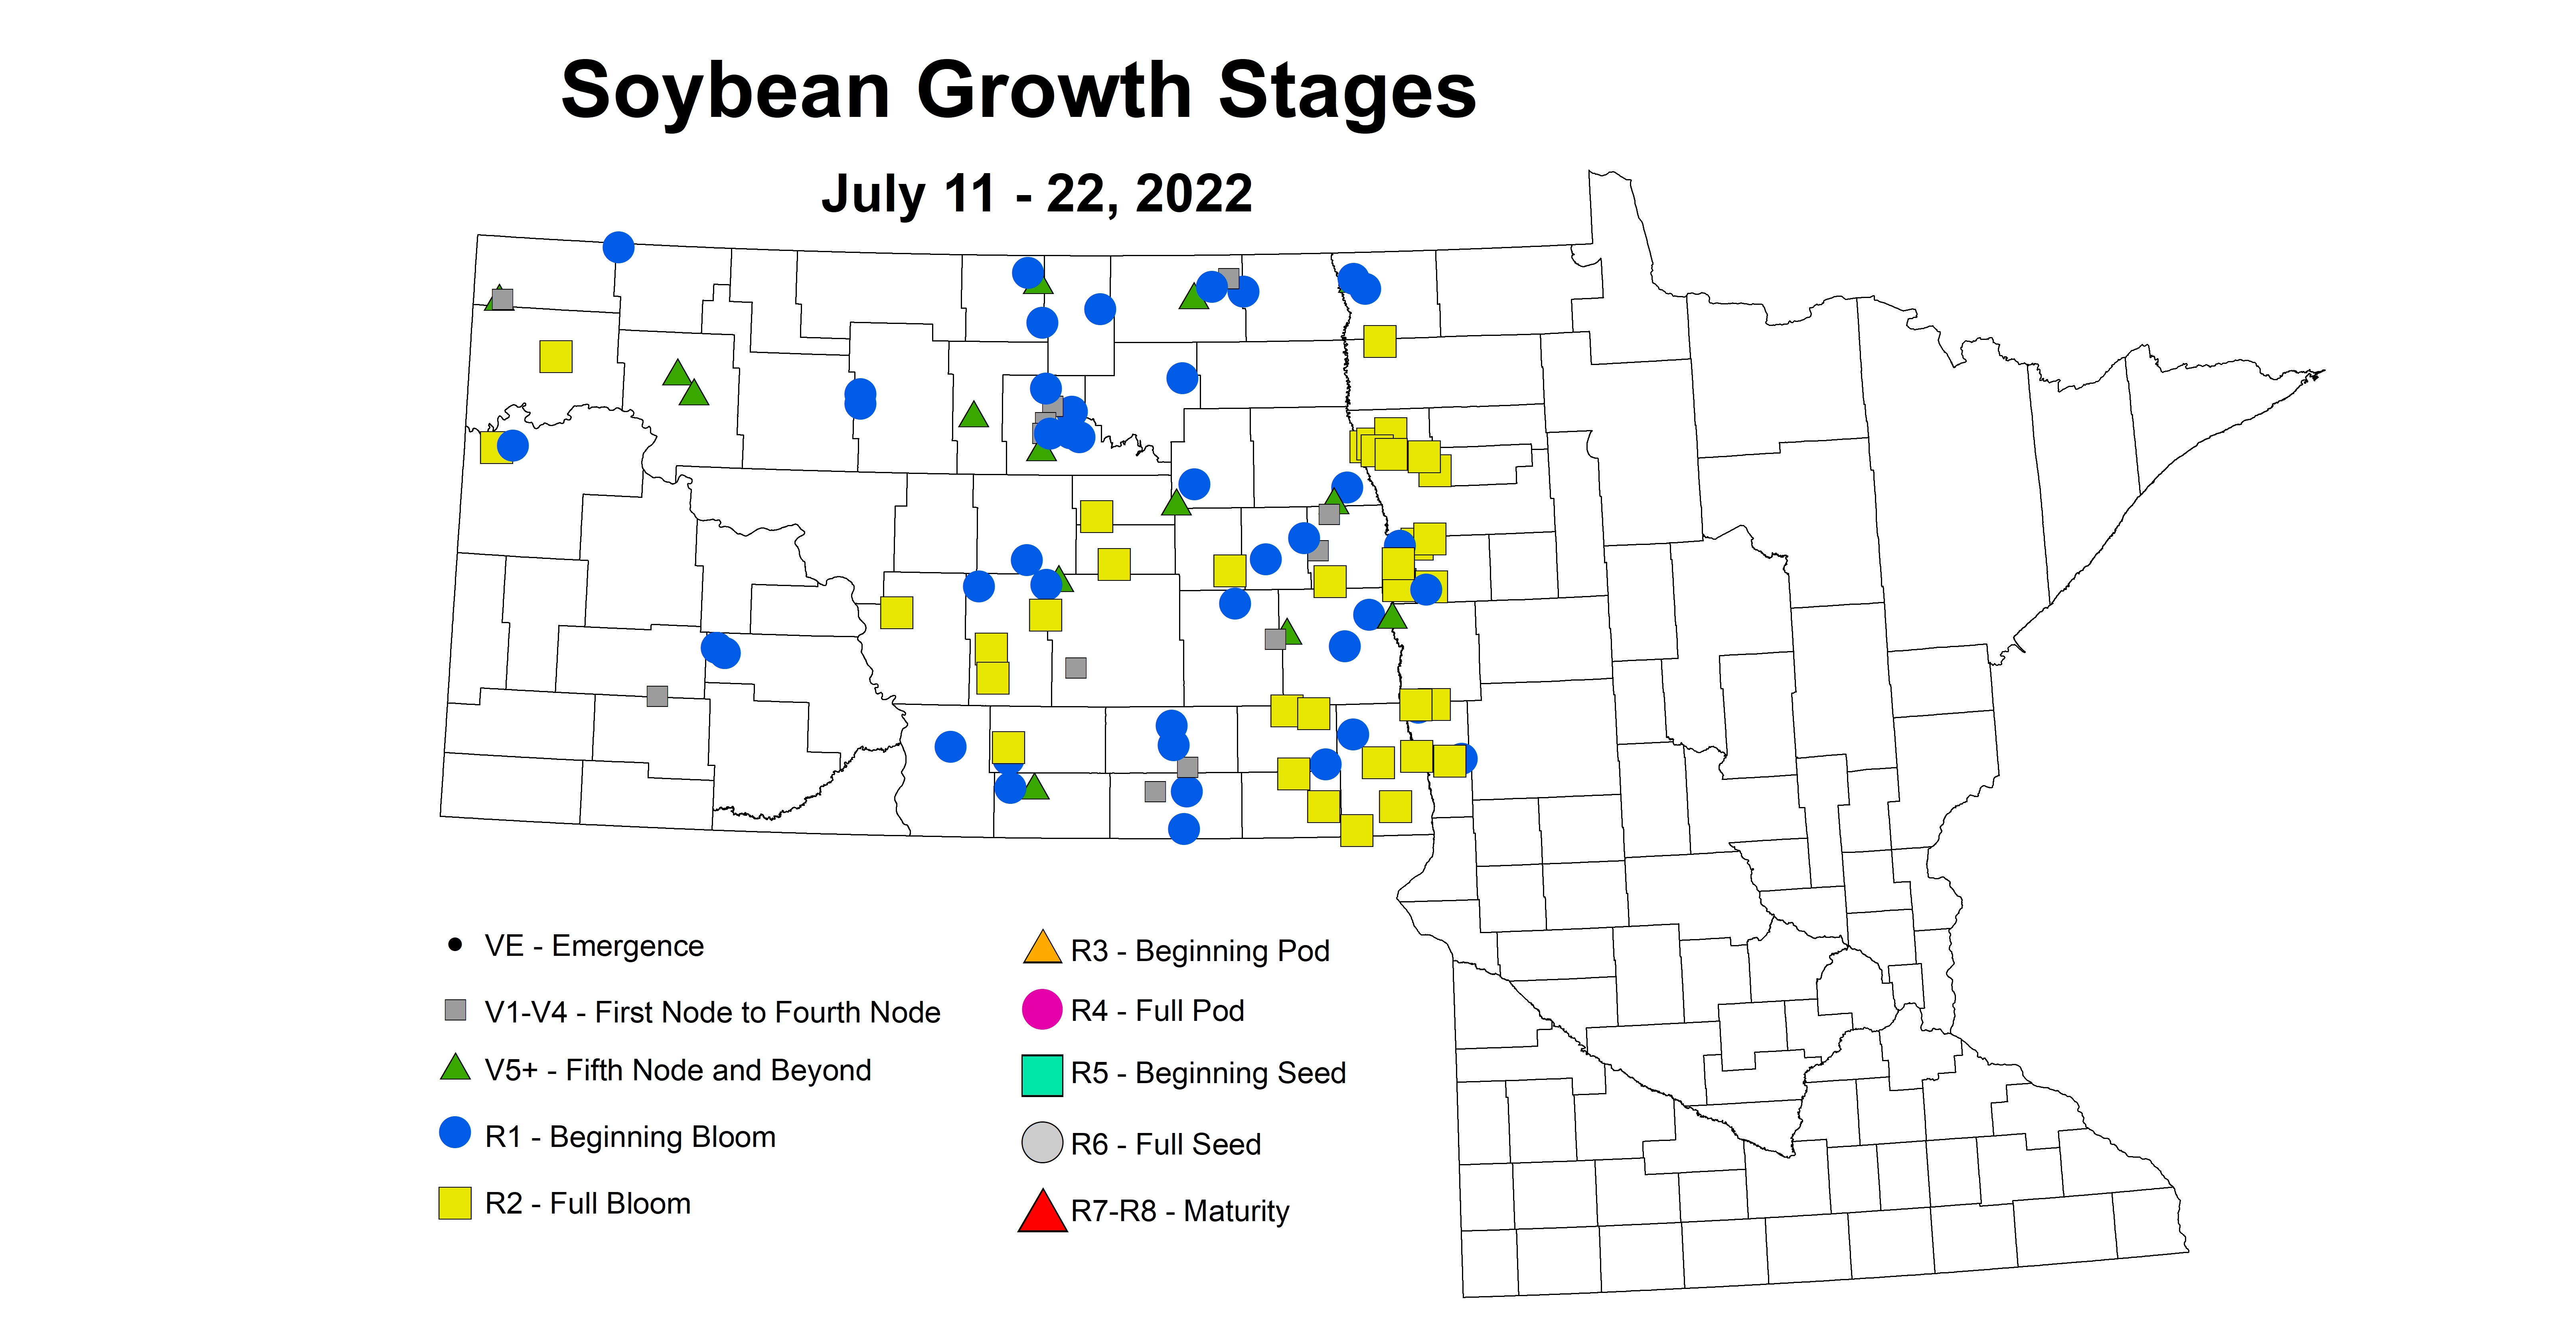 soybean growth stages 2022 7.11-7.22